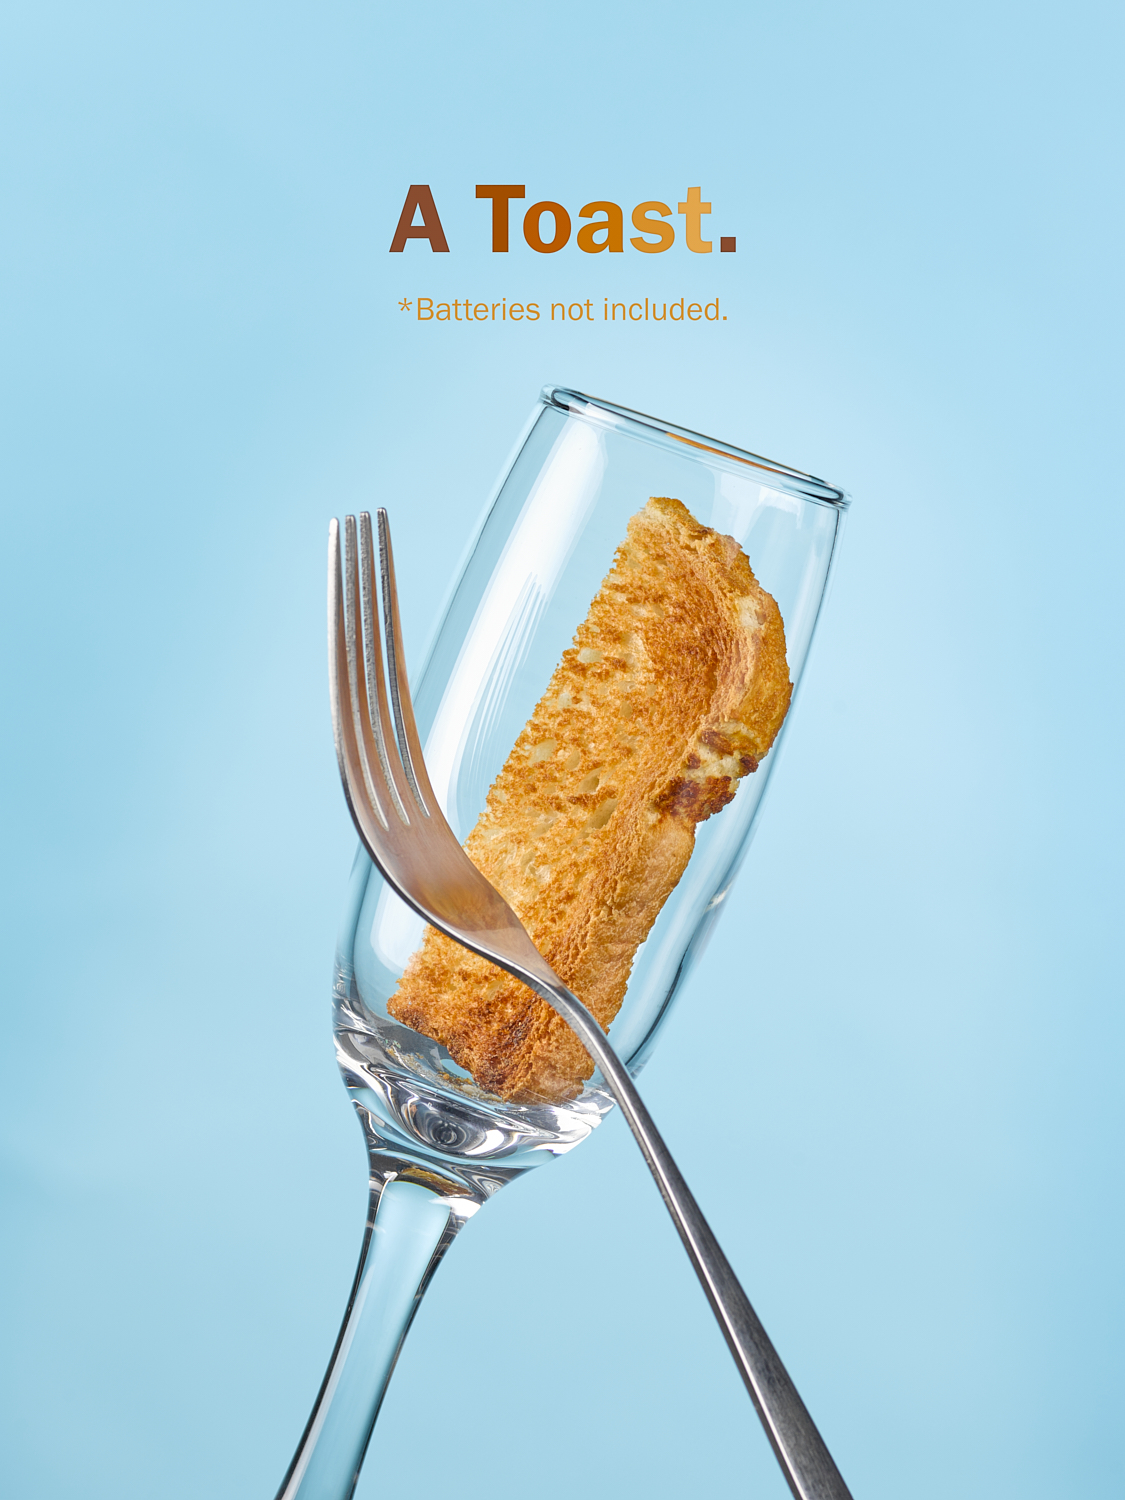 A photograph by Joey Rolph, depicting a champaign flute glass with toast in it.